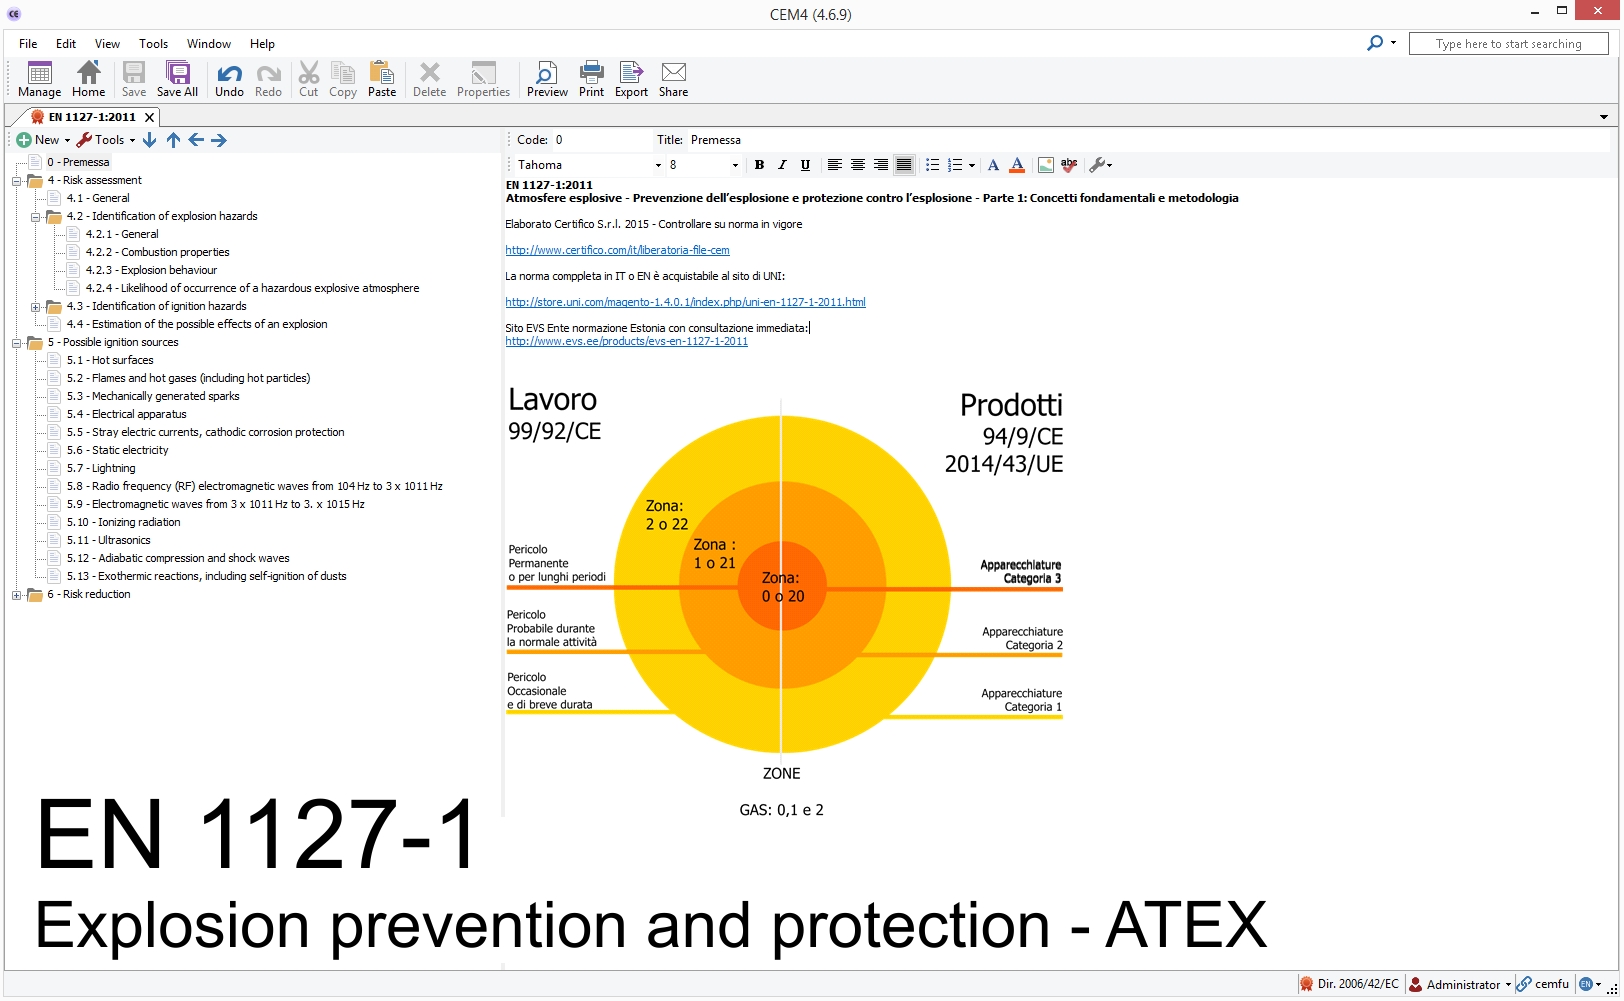 EN 1127-1:2011 Explosion prevention and protection ATEX - CEM File